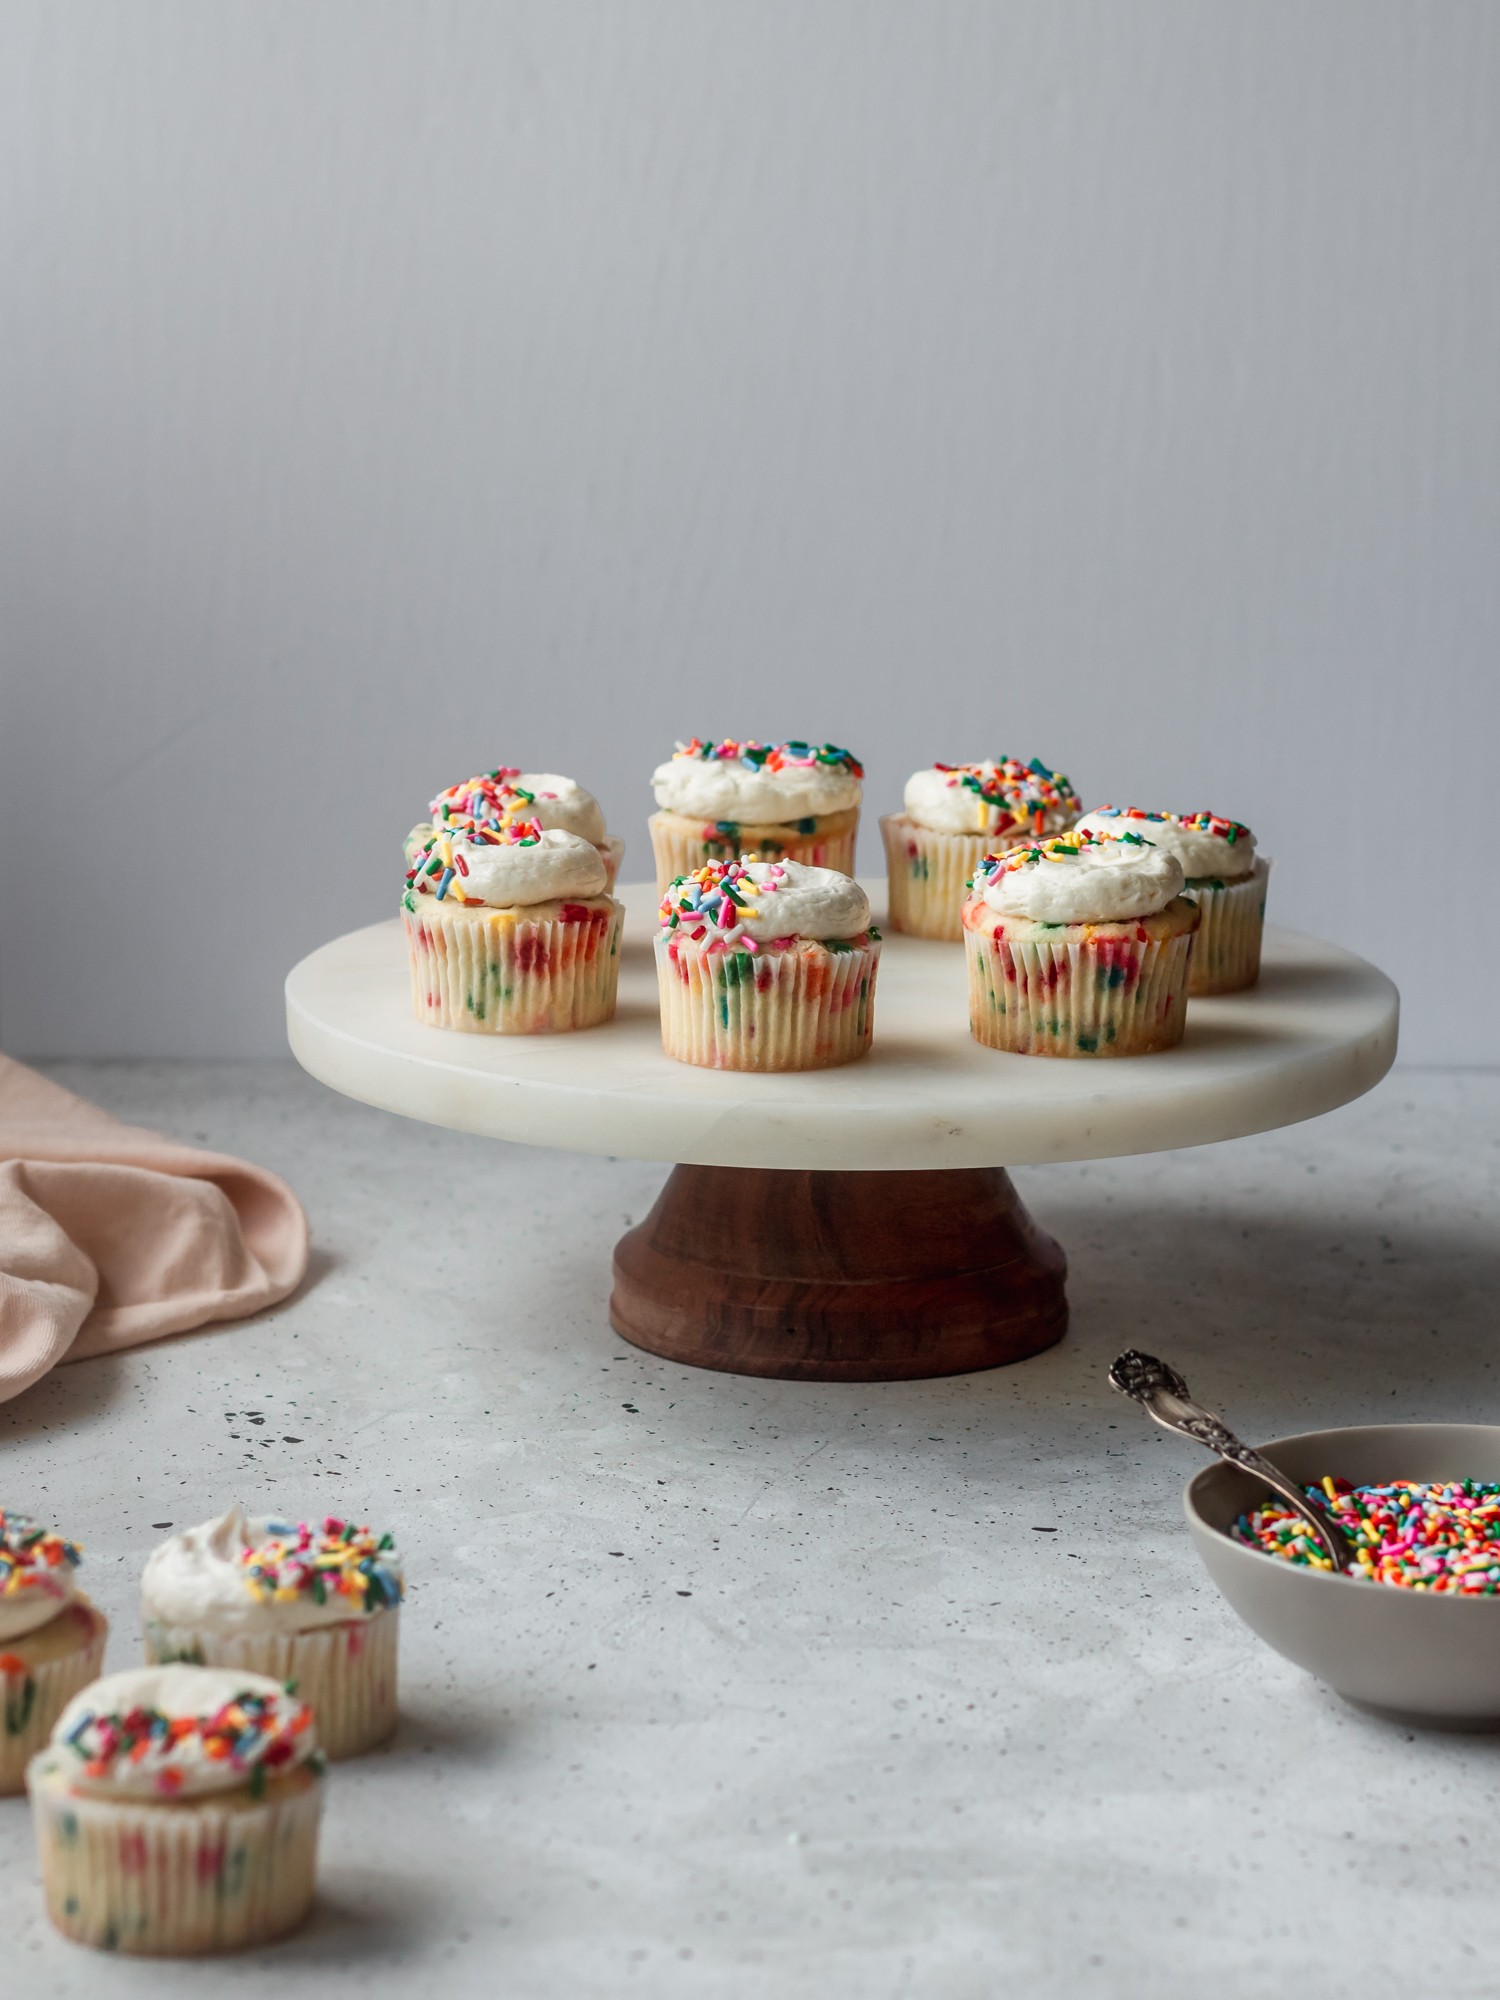 A marble cake stand with funfetti cupcakes on top next to a pink linen, more cupcakes, and a bowl of sprinkles on a grey table.